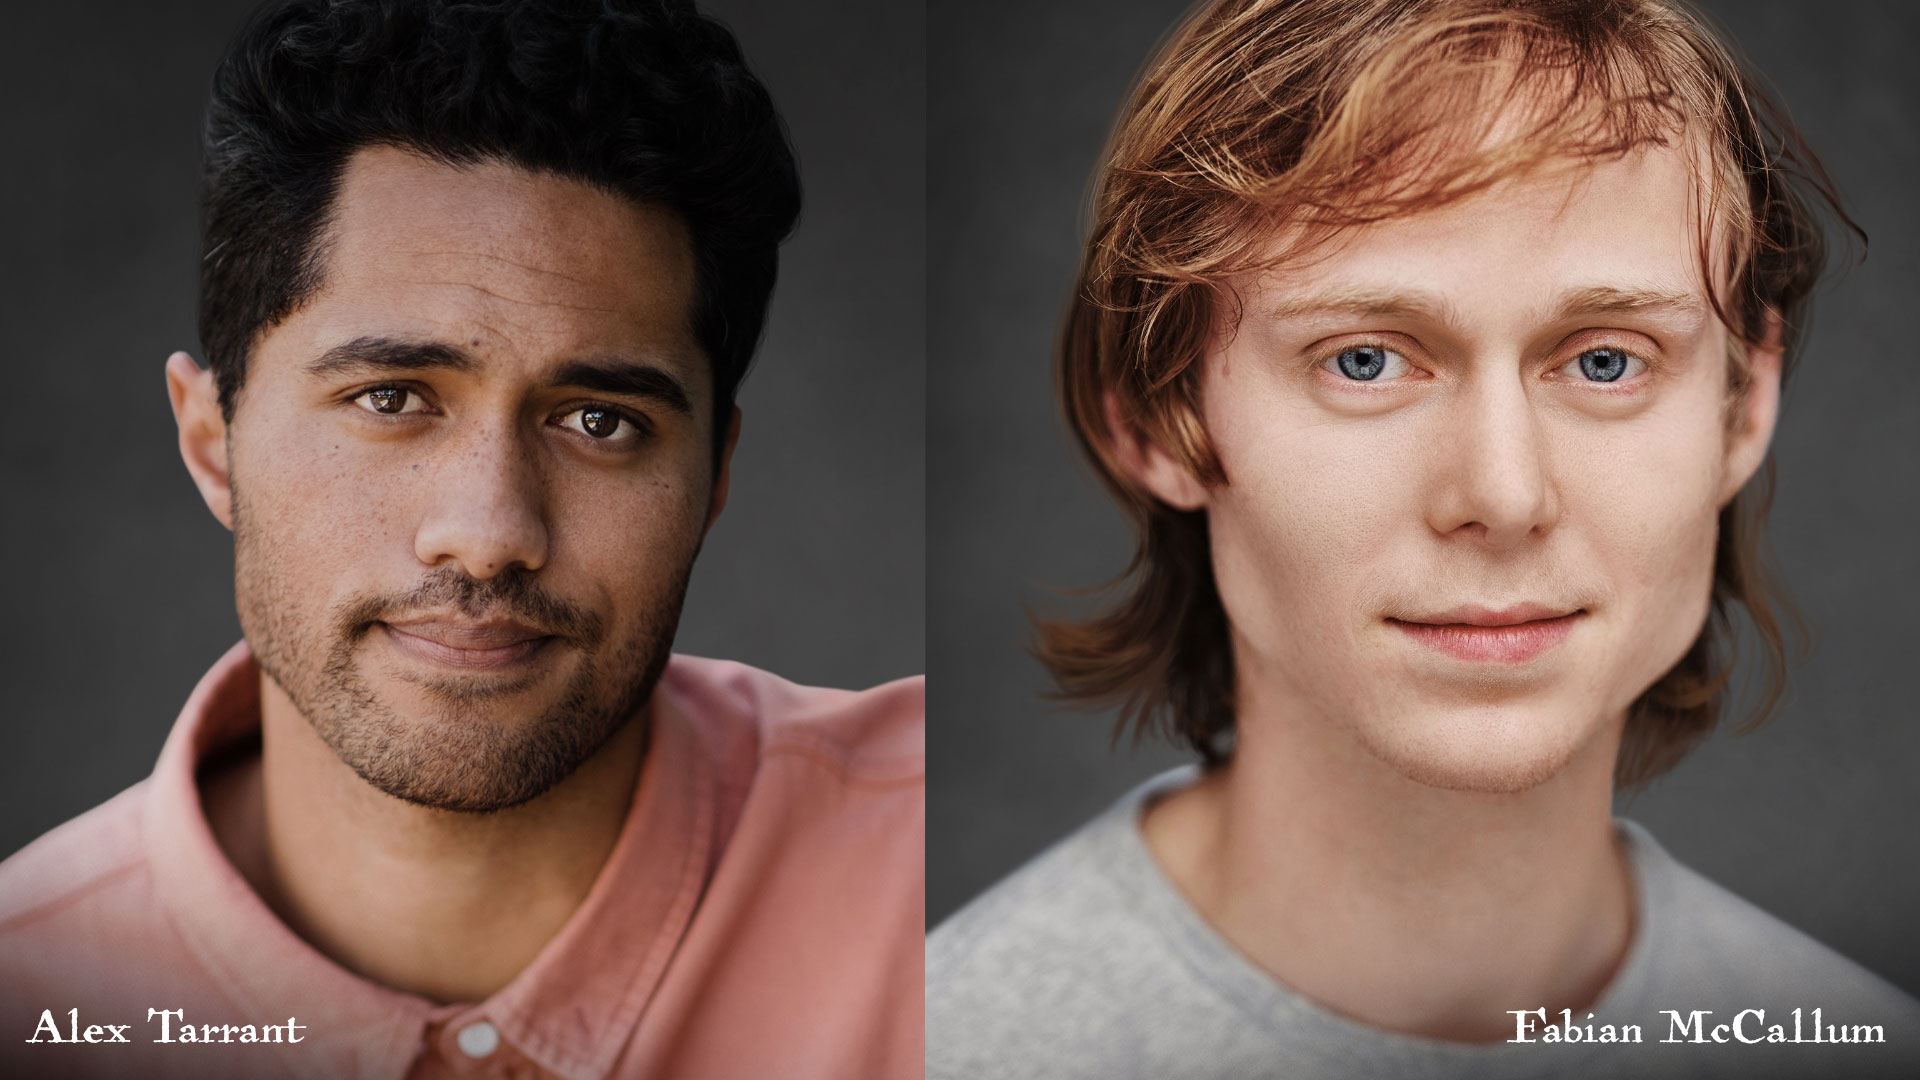 Alex Tarrant and Fabian McCallum cast in Amazon Prime's The Lord of the Rings